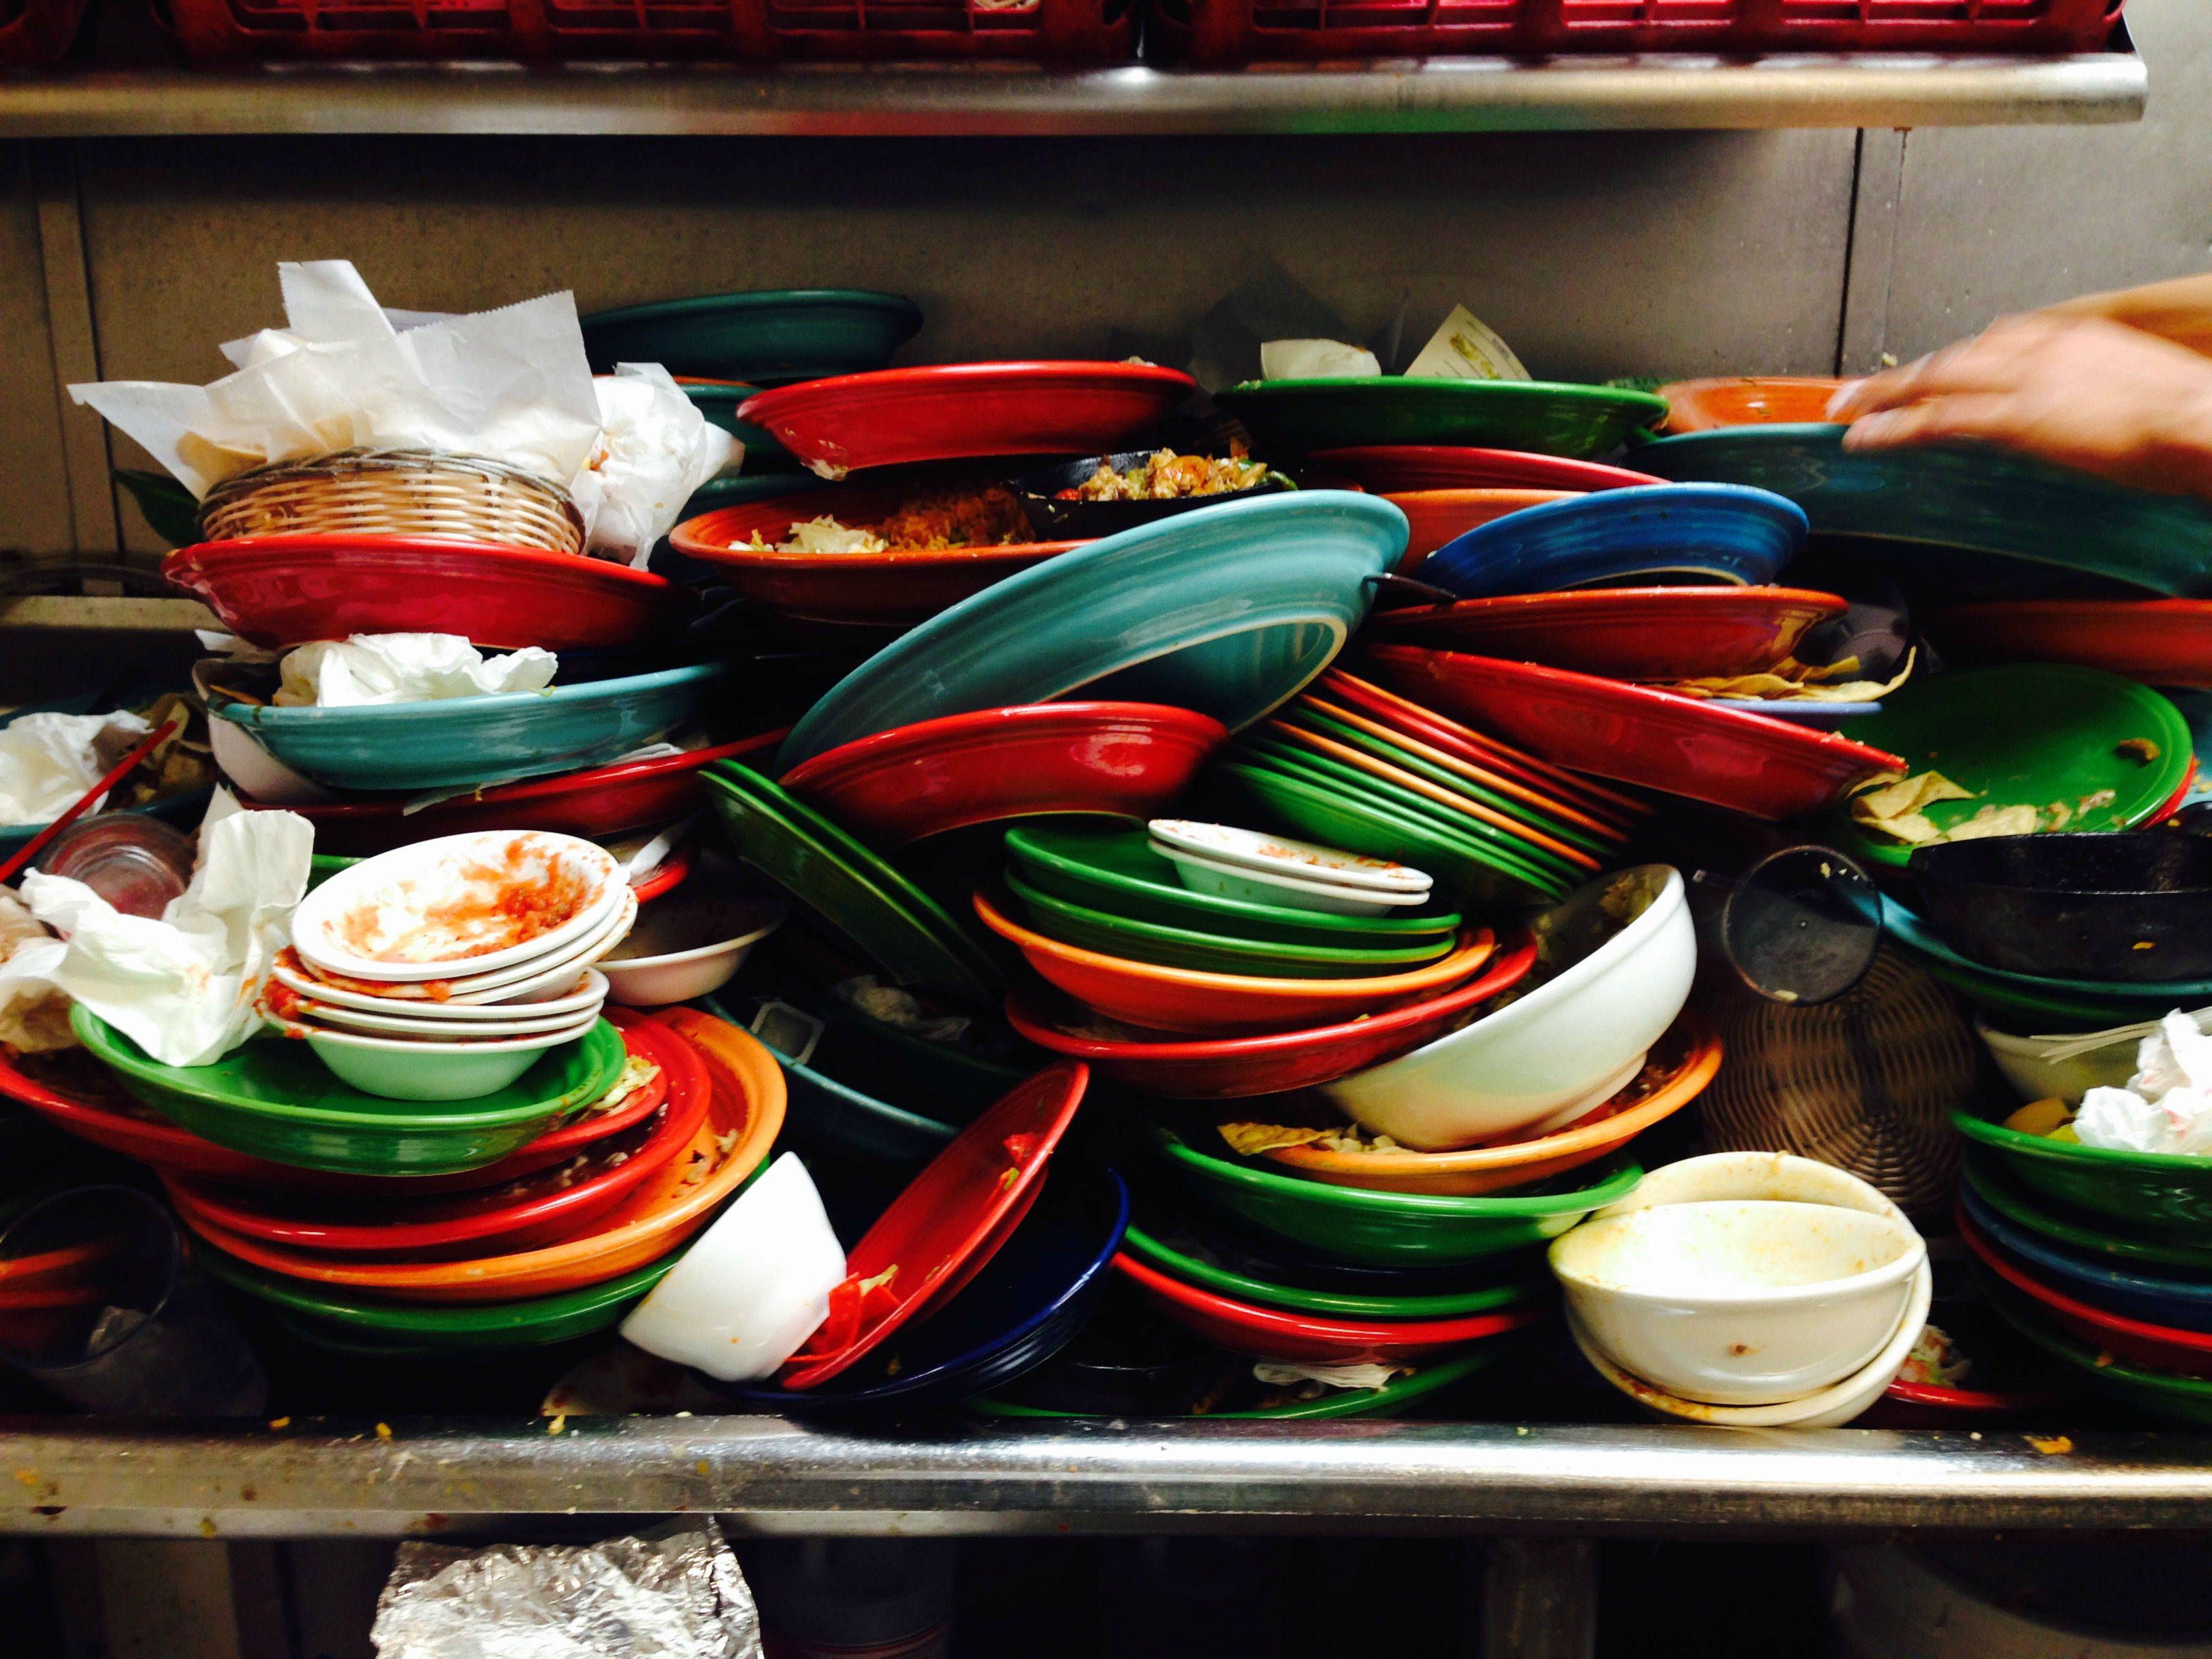 funny work stories - pile of dirty dishes